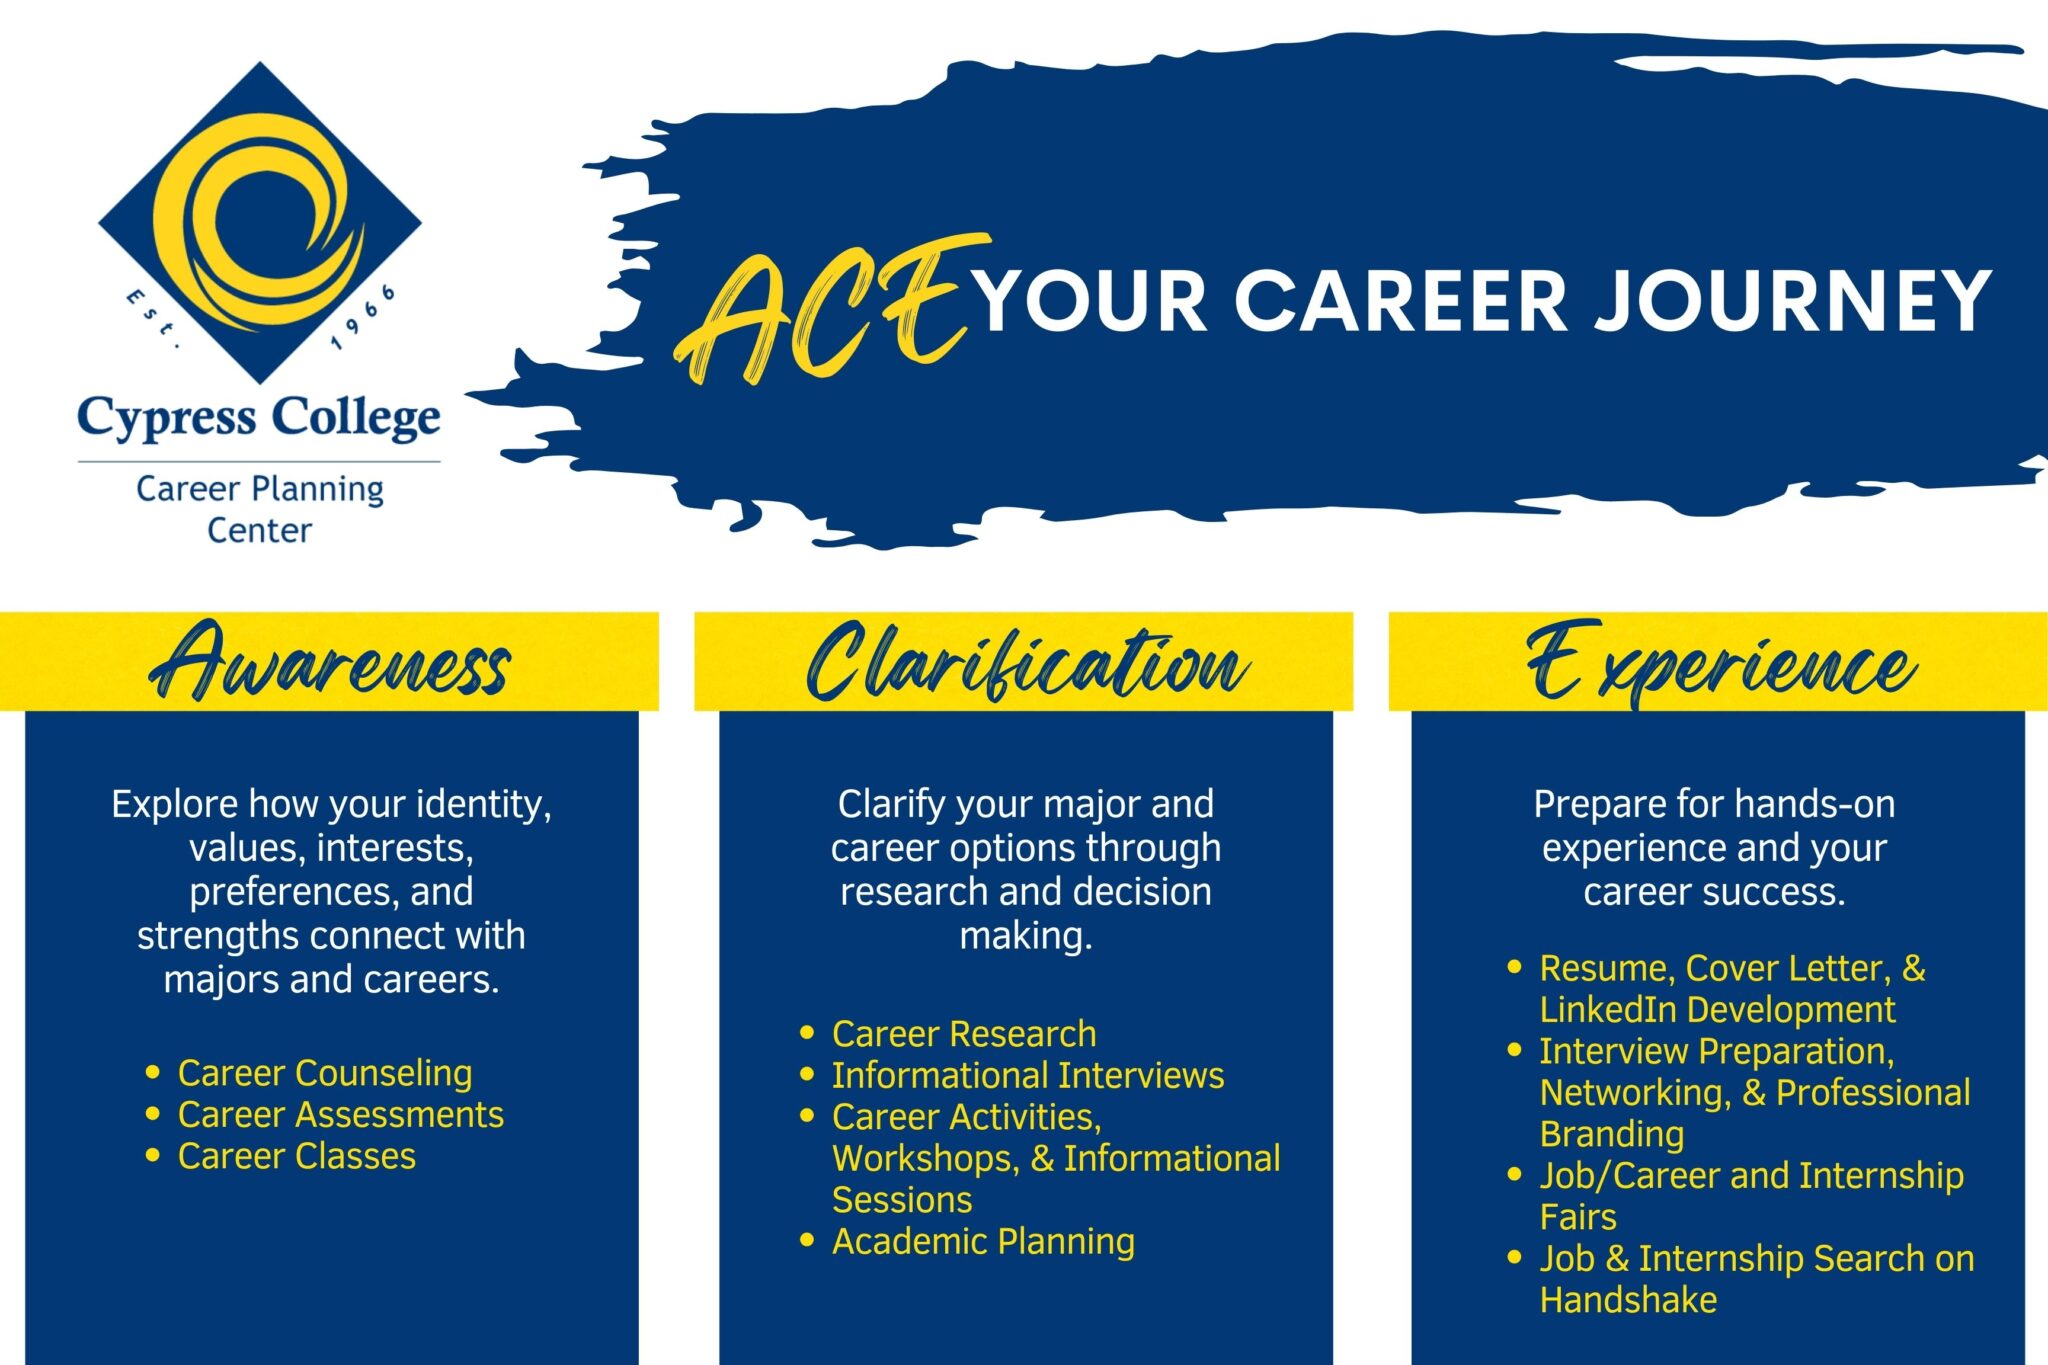 ACE Your Career Journey